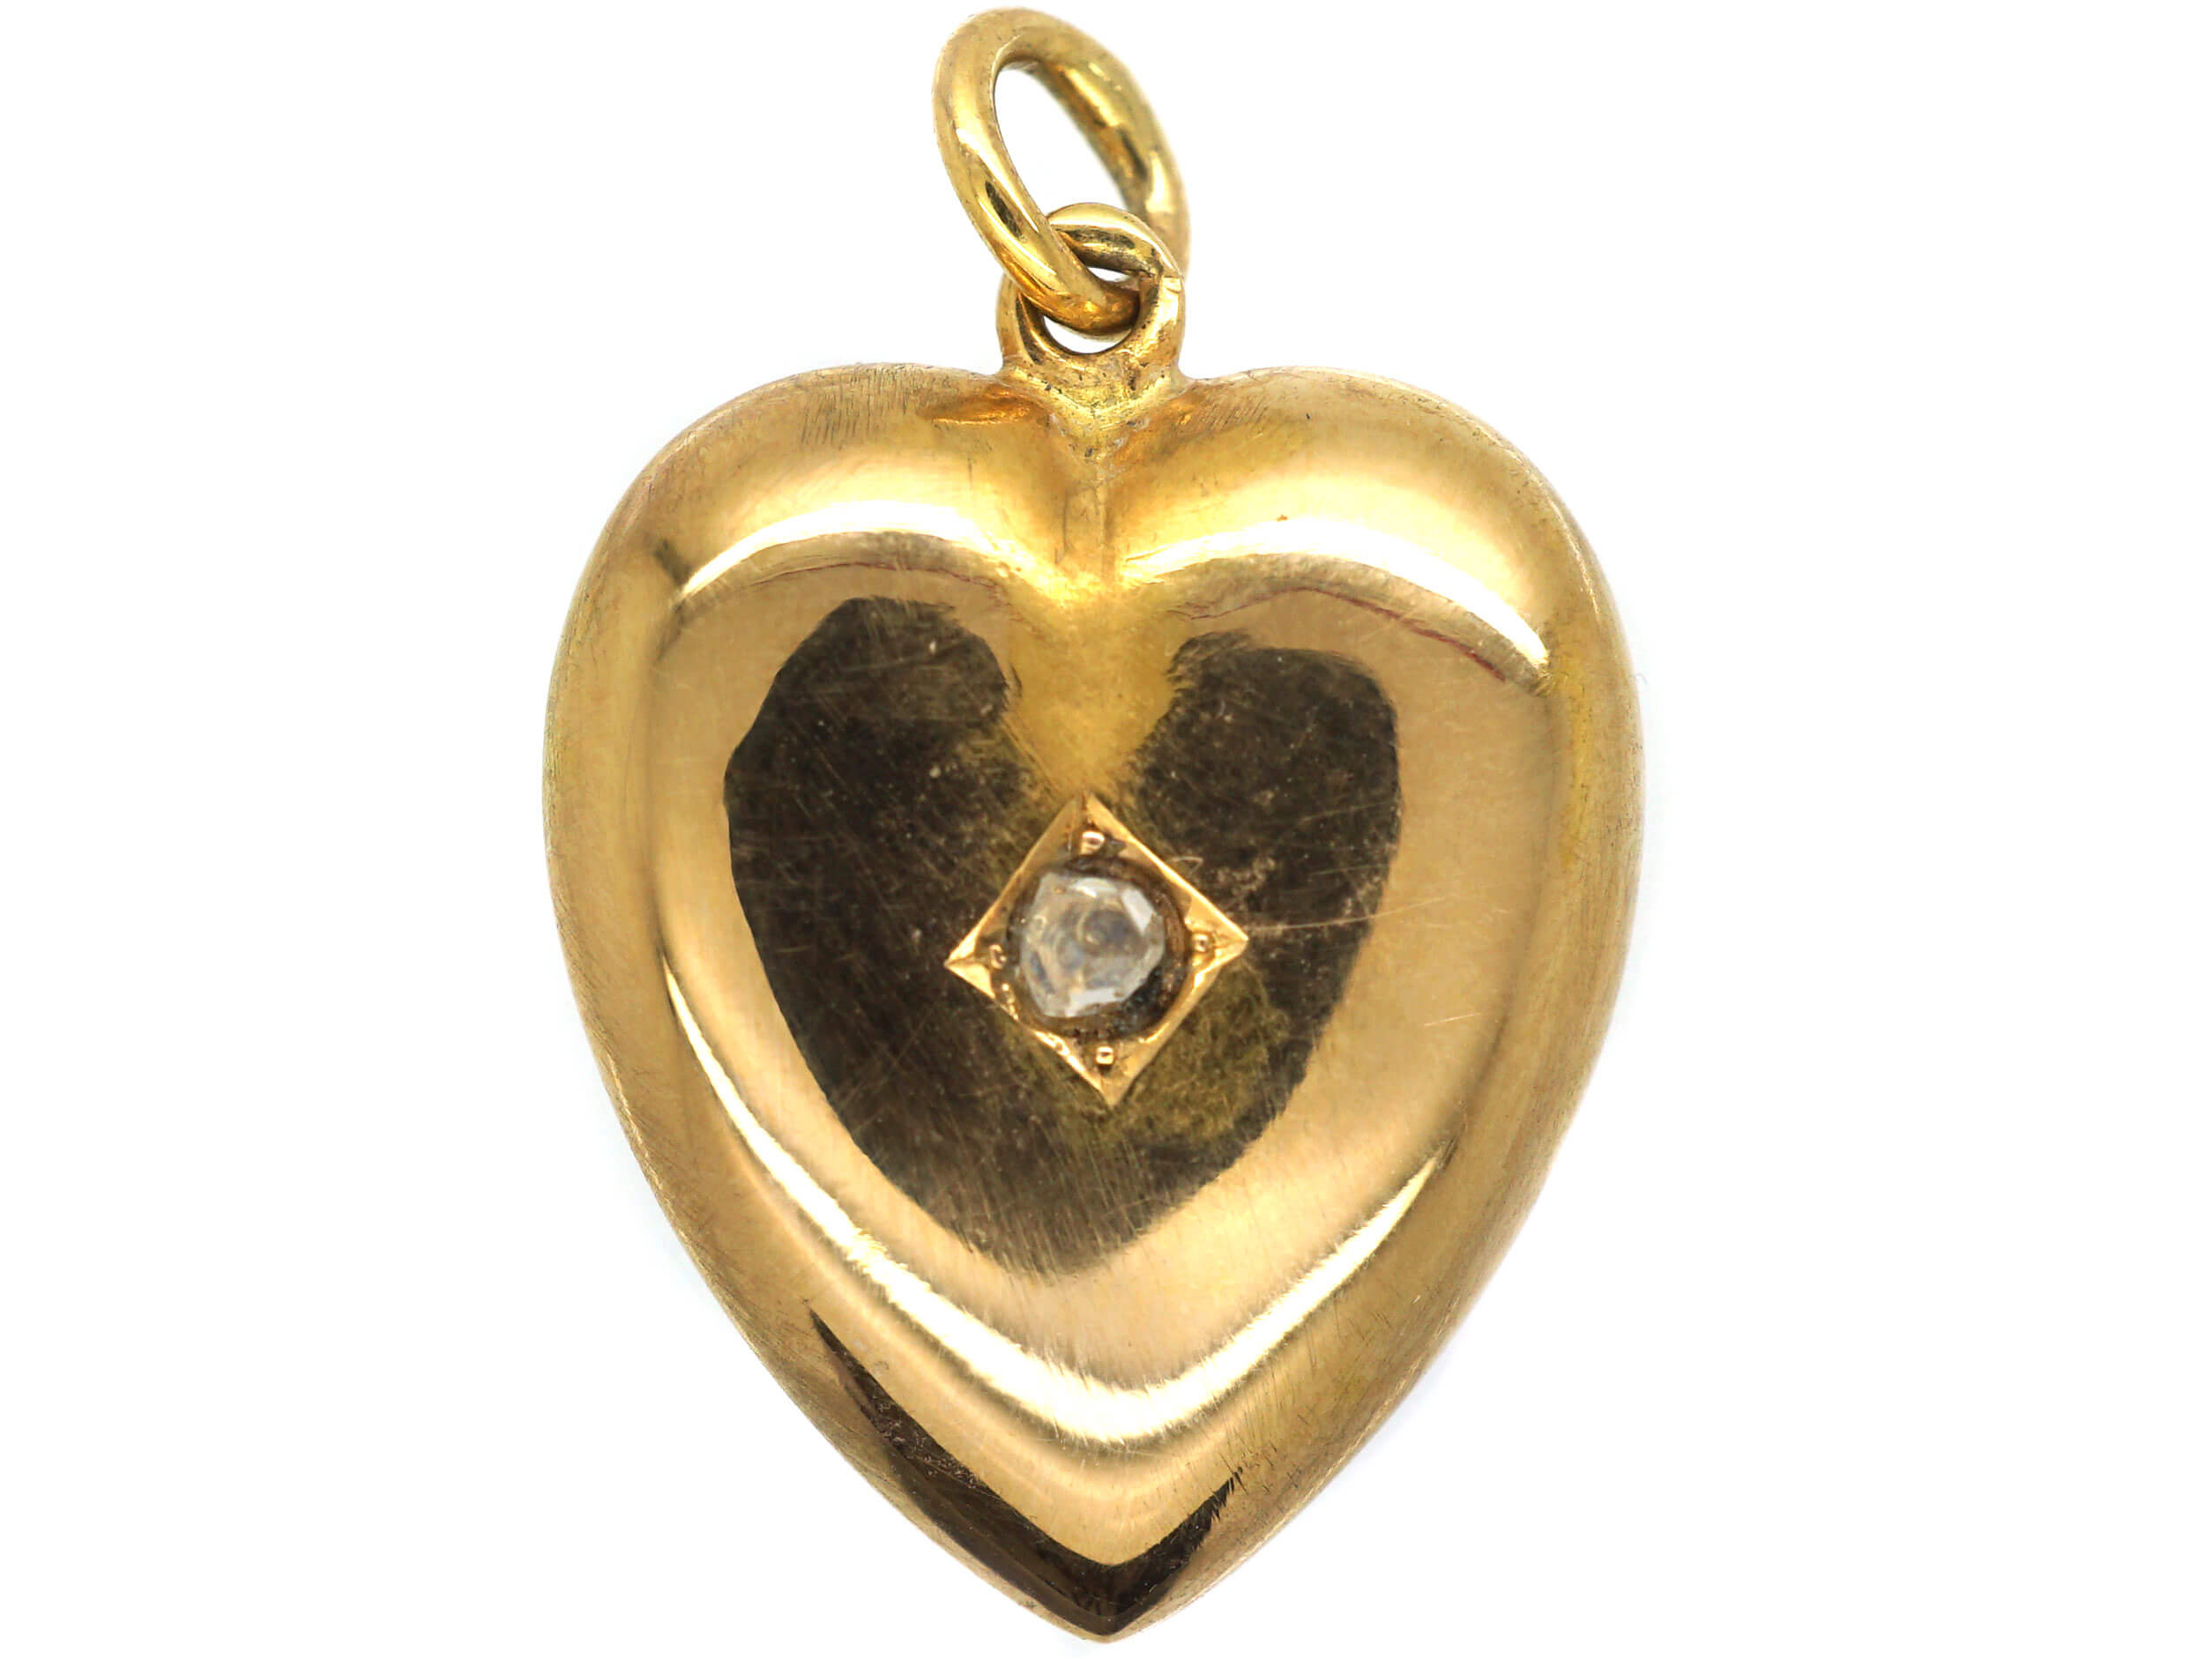 Edwardian 15ct Gold Heart Pendant set with a Rose Diamond (394N) | The ...